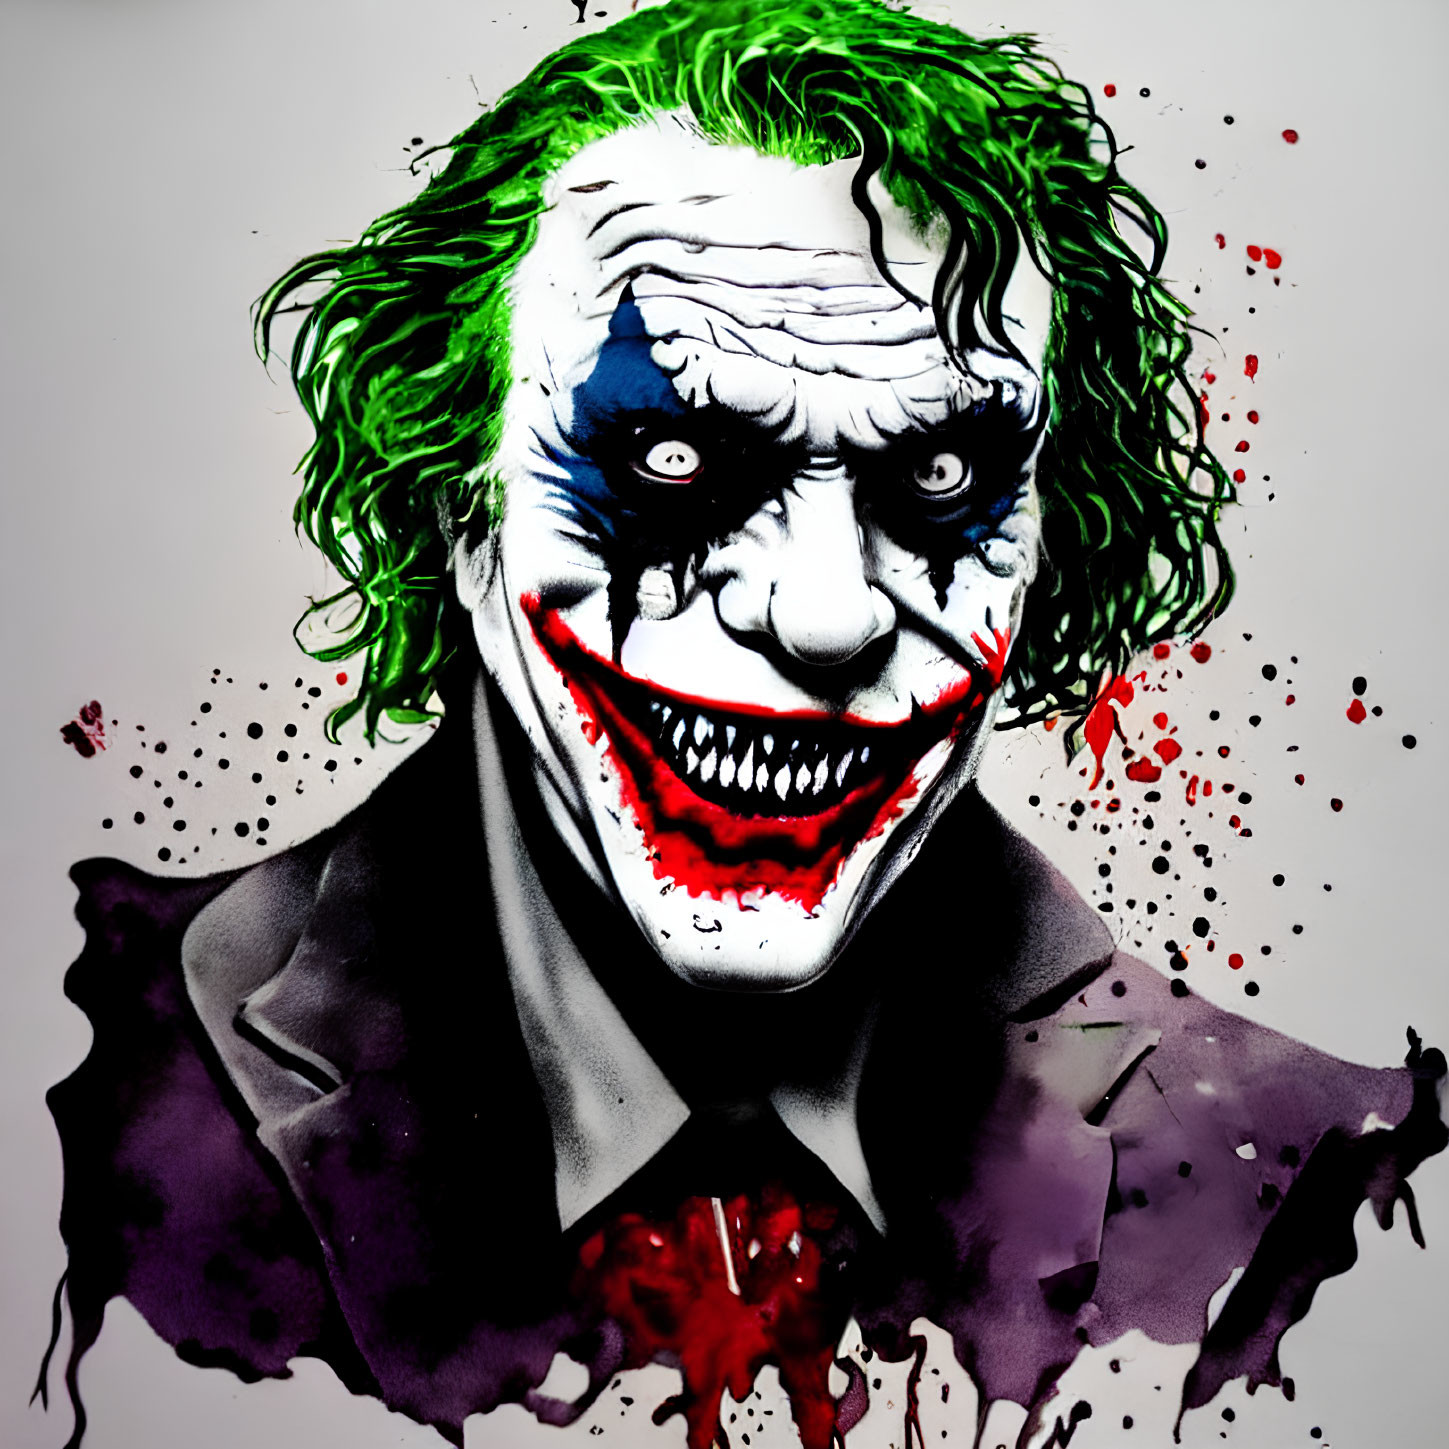 Detailed Joker illustration with green hair, white face, red grin, and ink blots